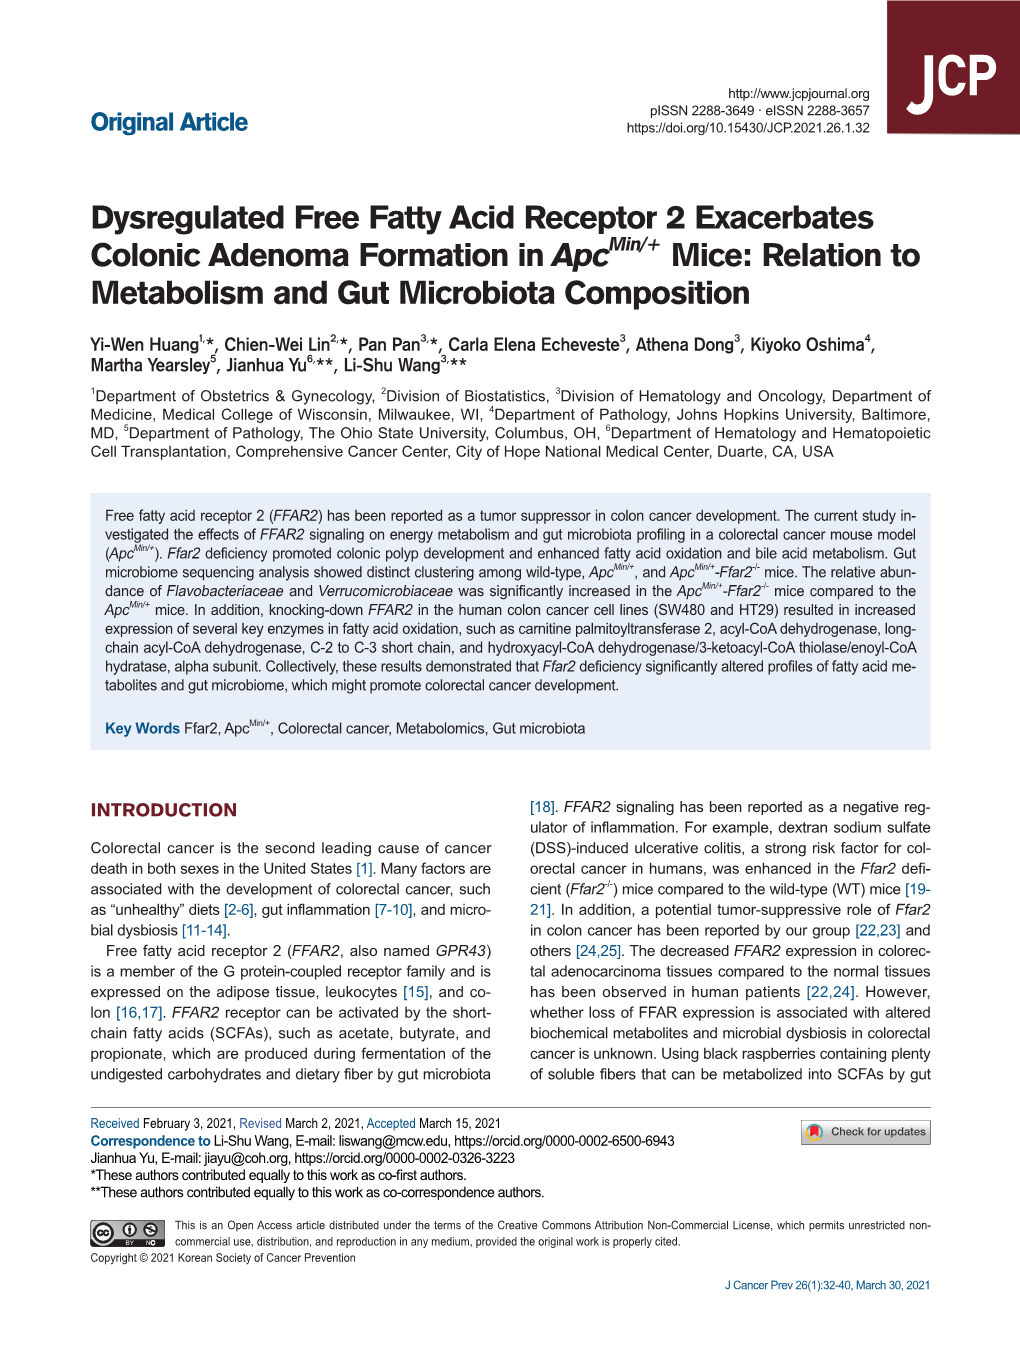 Dysregulated Free Fatty Acid Receptor 2 Exacerbates Colonic Adenoma Formation in Apcmin/+ Mice: Relation to Metabolism and Gut Microbiota Composition